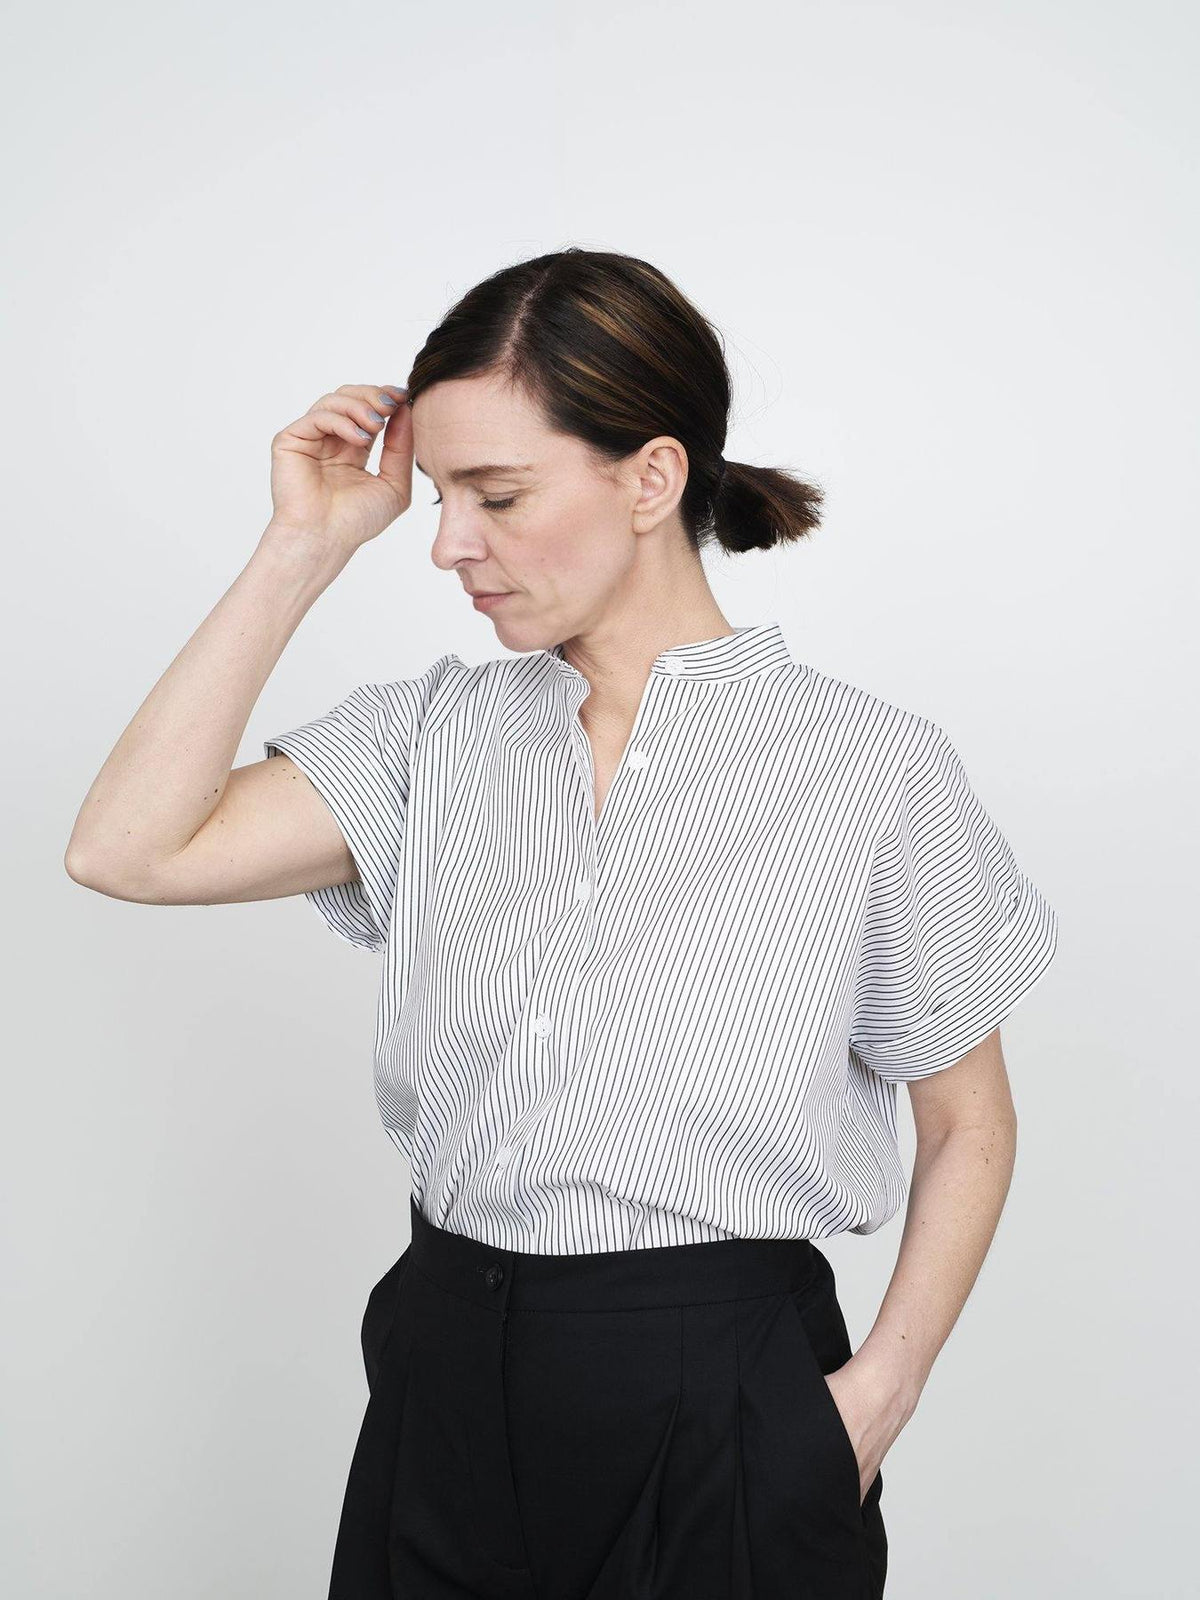 Cap Sleeve Shirt - The Assembly Line - MaaiDesign